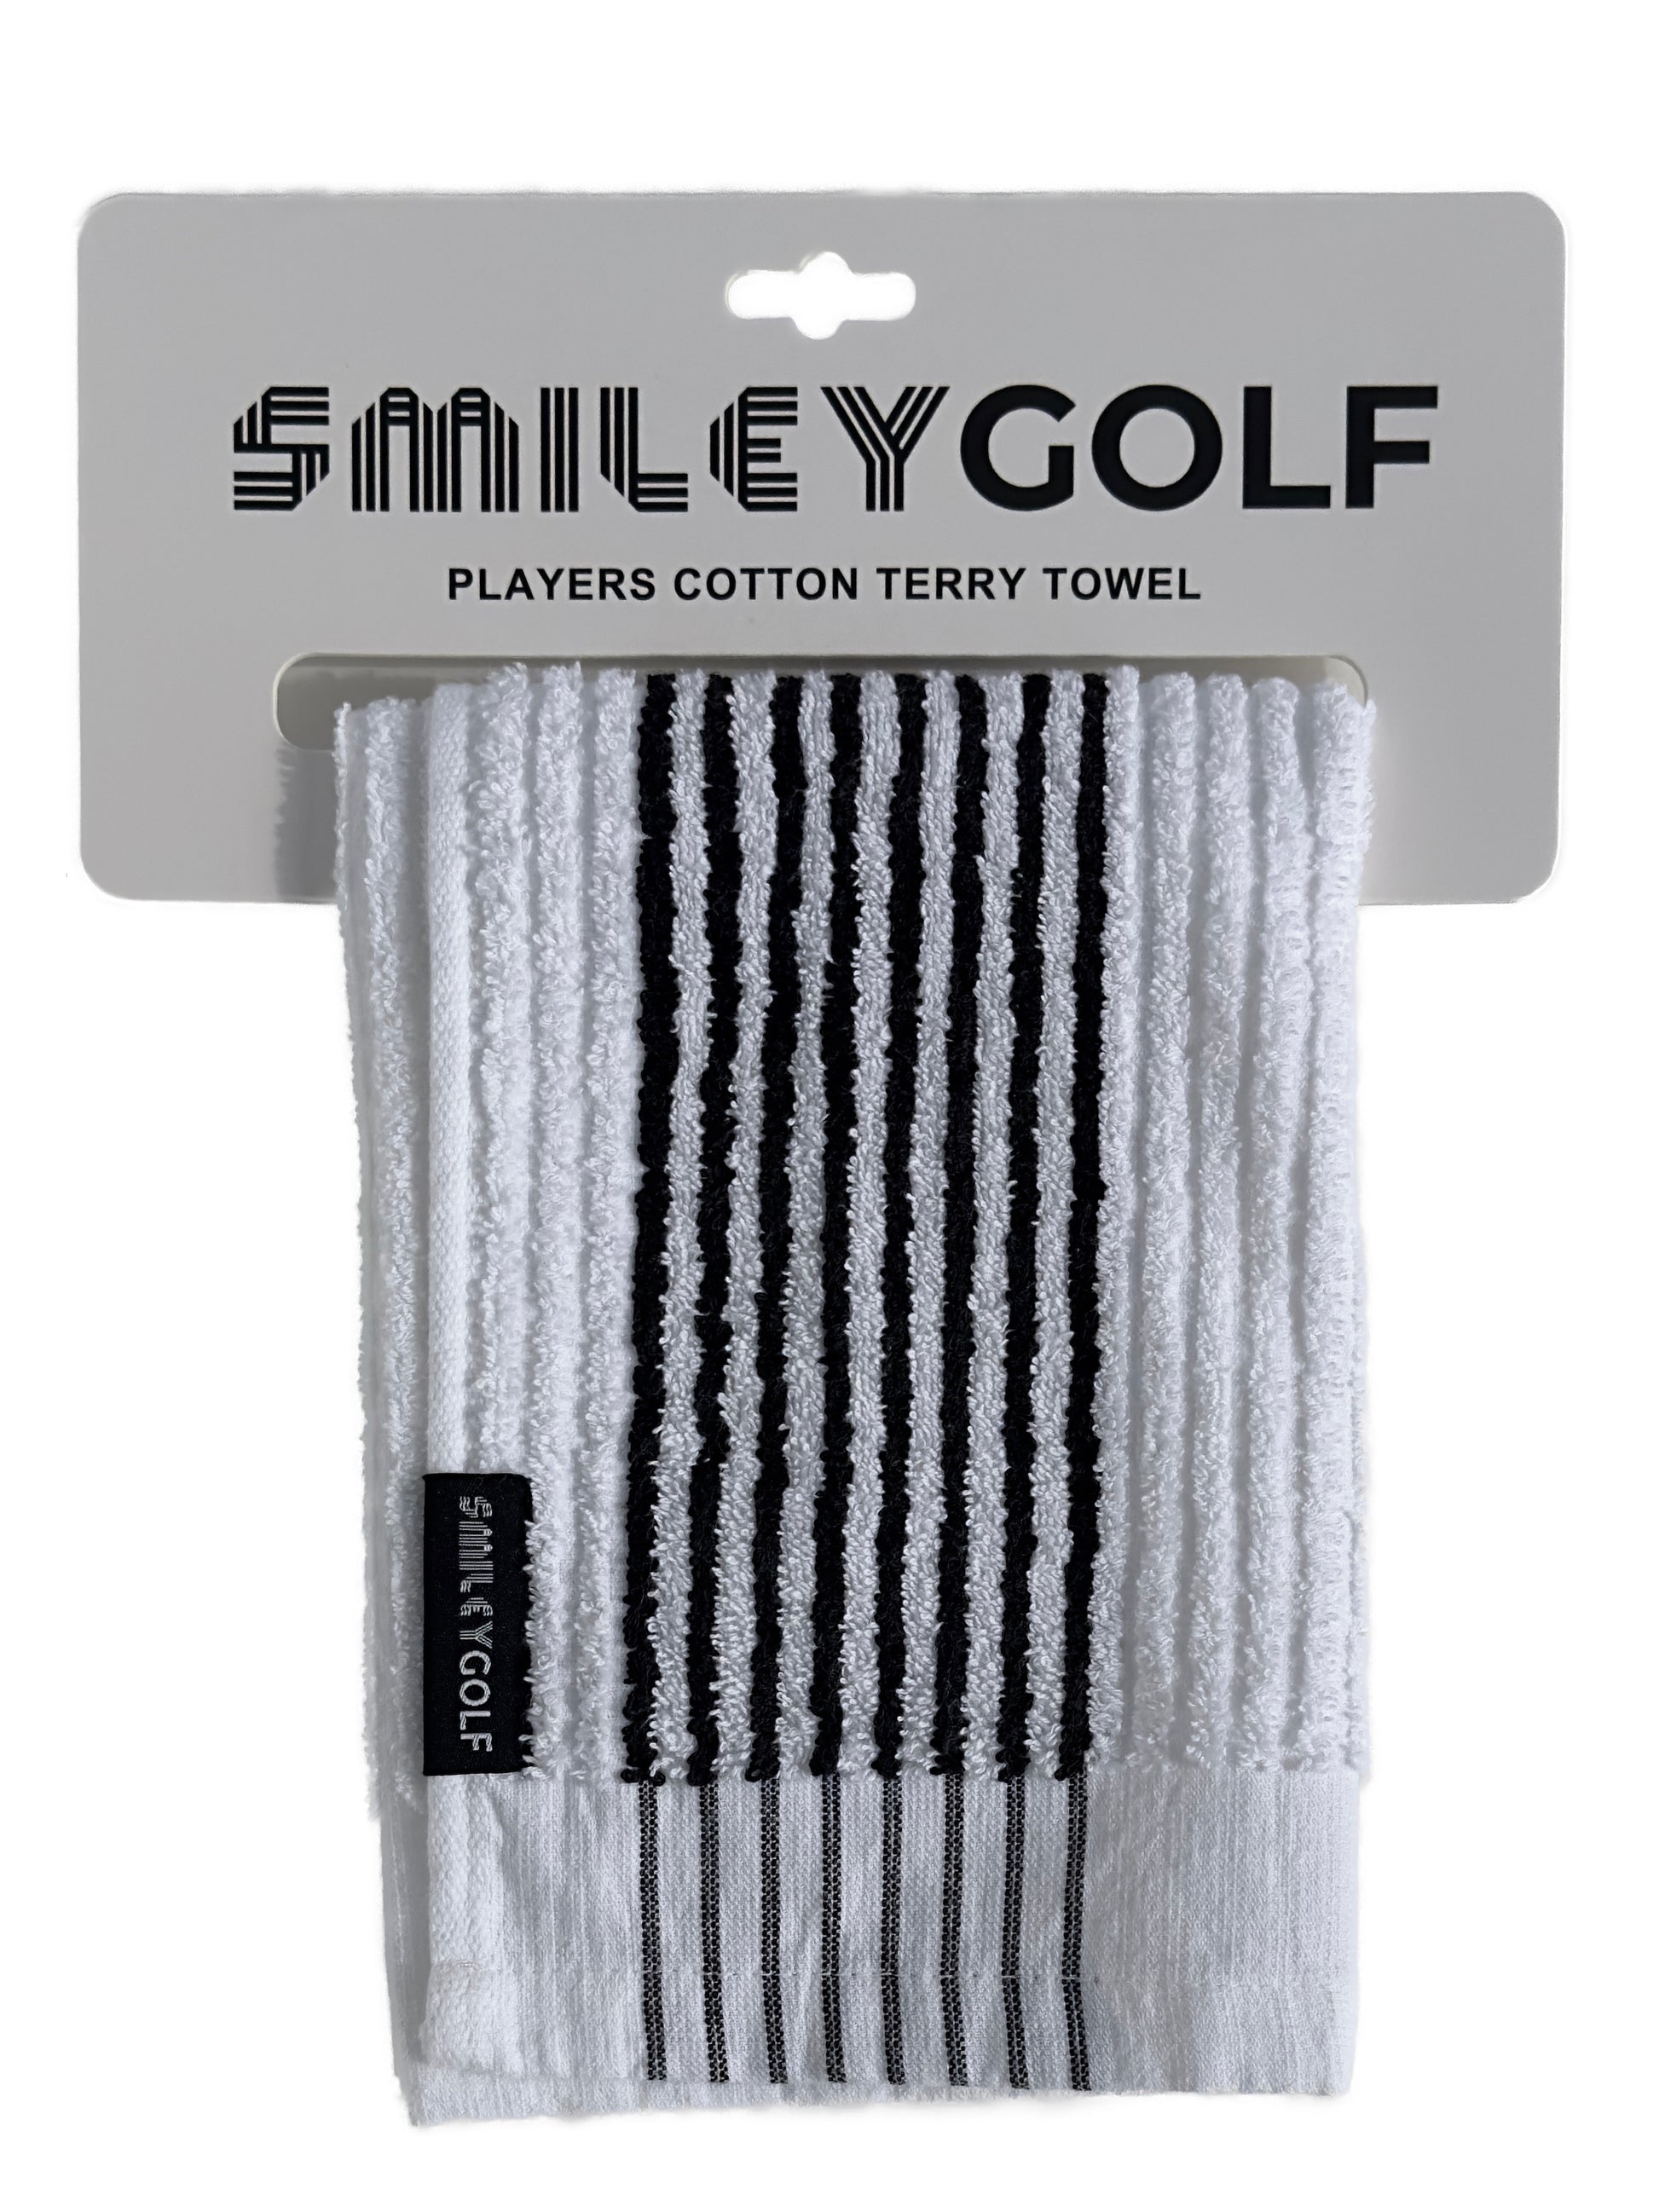 3 Pack Royal Fingertip Sports Golf Towels, Small Hand Towels in